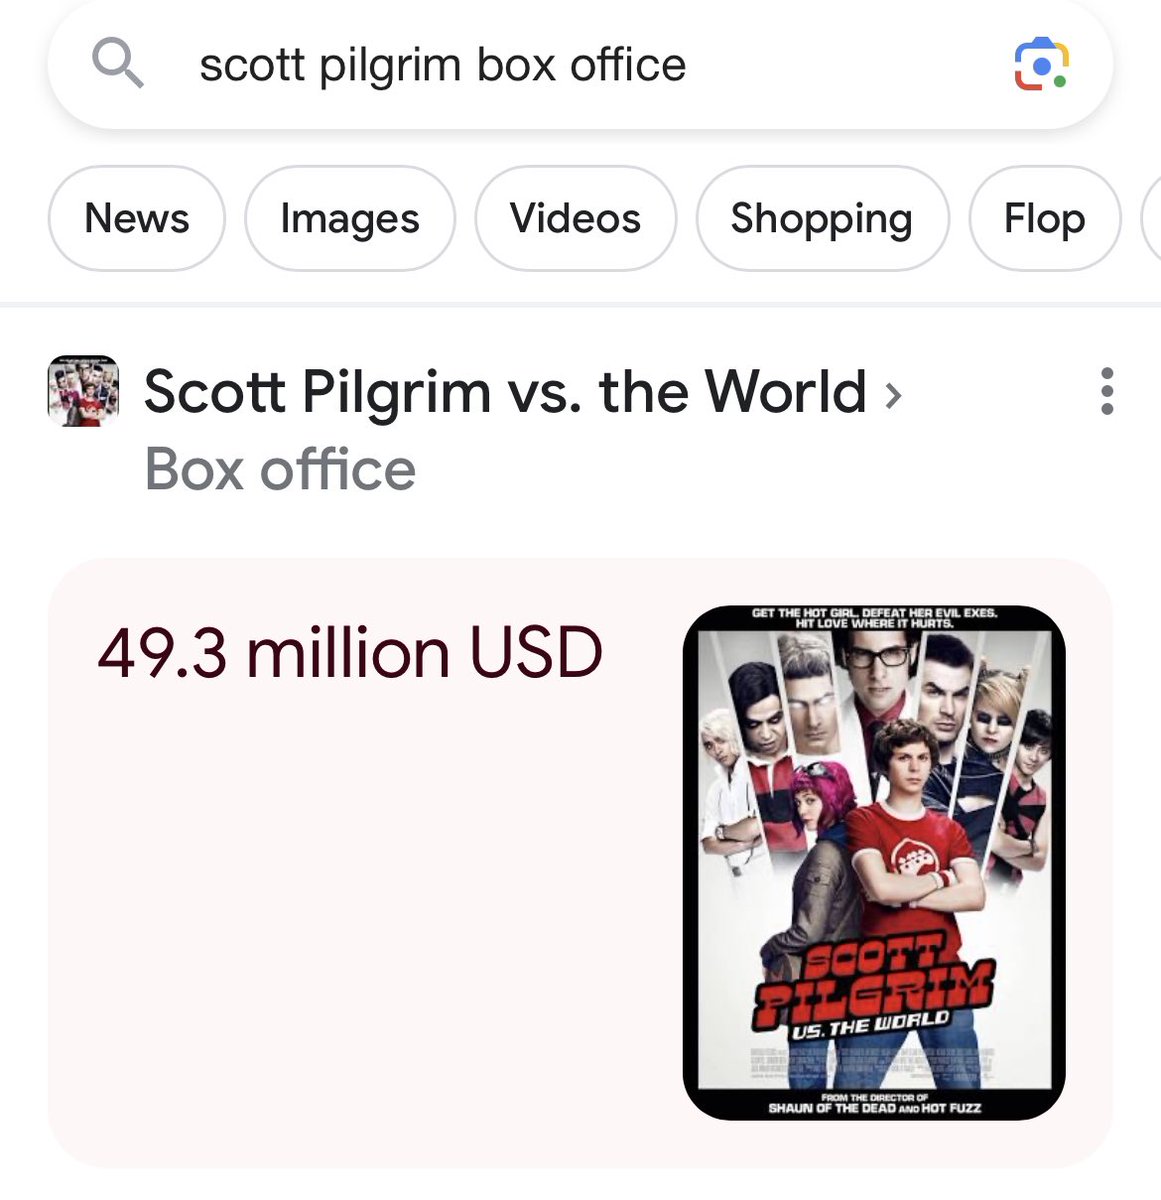 I’m not surprised Shazam 2 made almost 3 times the box office of Scott pilgrim since it’s 3 times as good